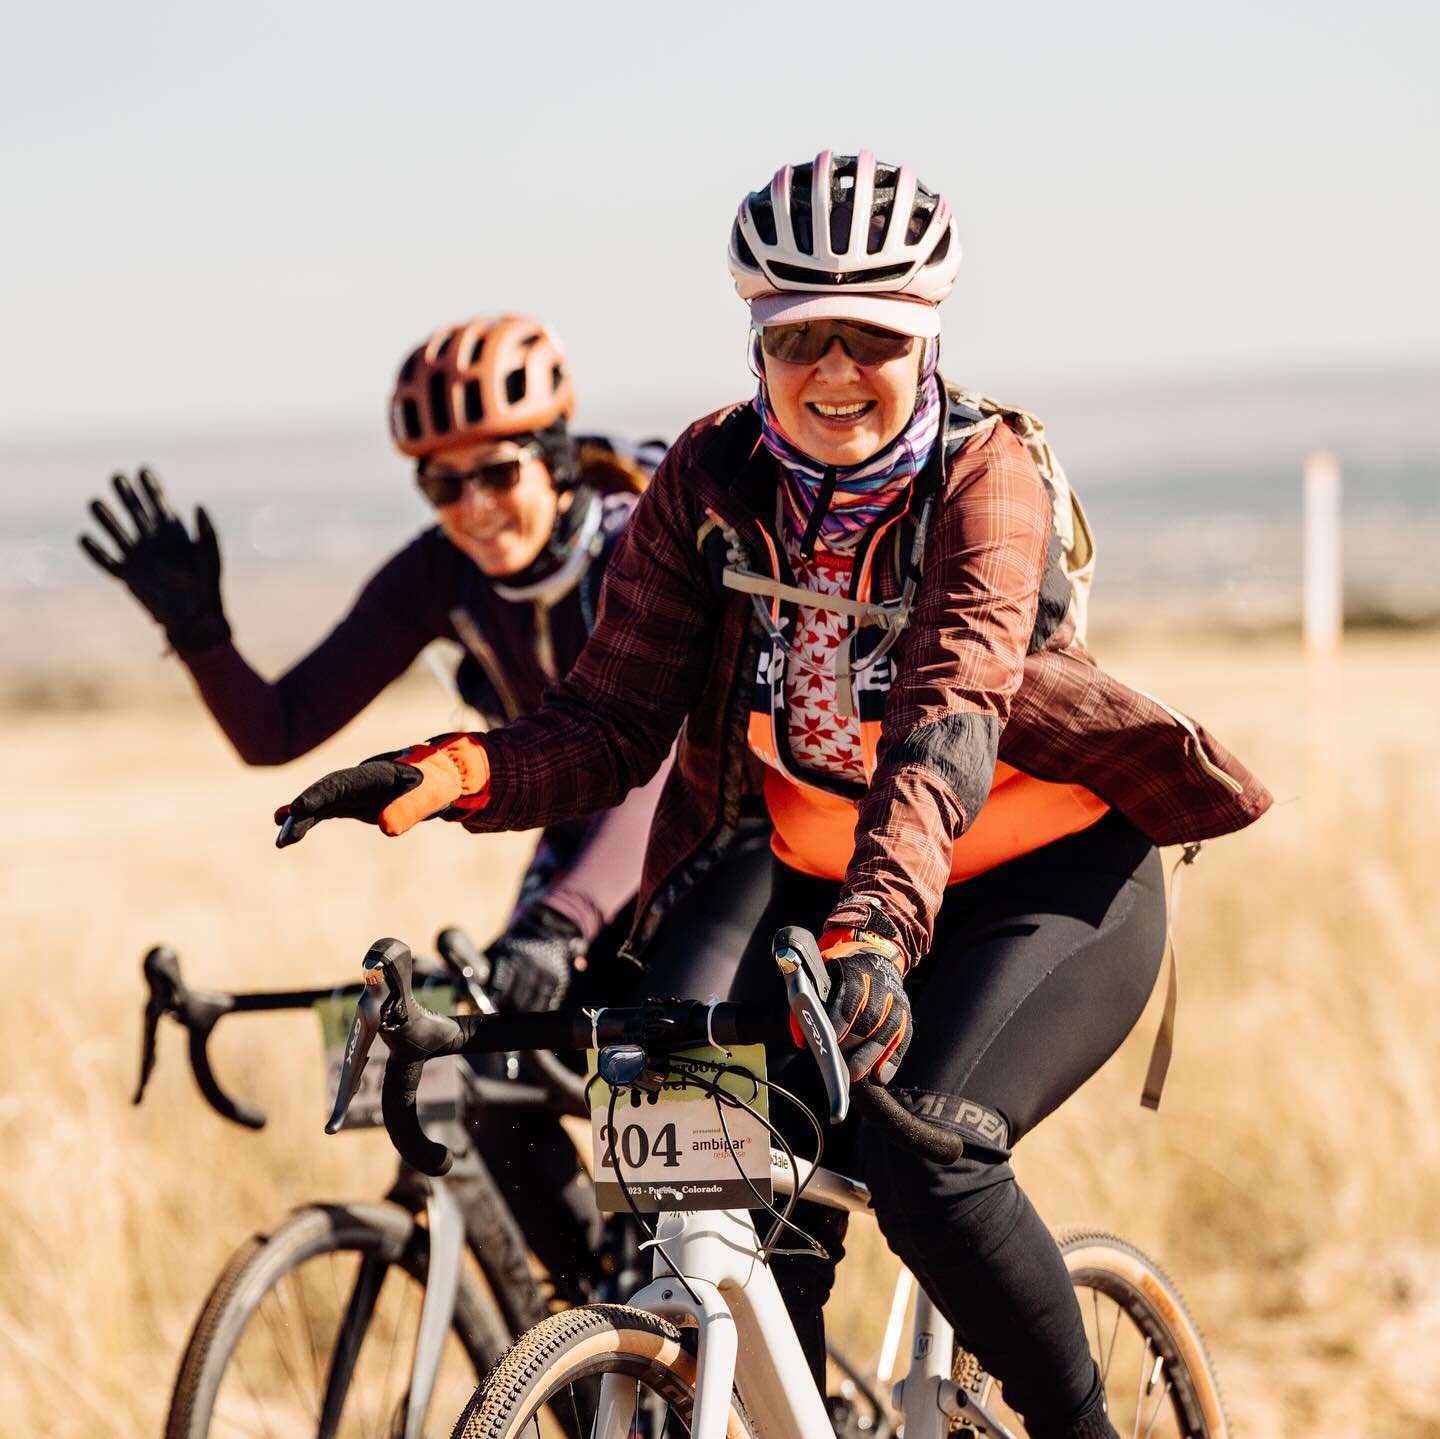 Your race, your pace. One of our favorite things ever is being able to share the same ride with a bunch of folks and see it enjoyed in a myriad of ways. Different people, different bikes, different struggles, different victories. Y&rsquo;all are amaz